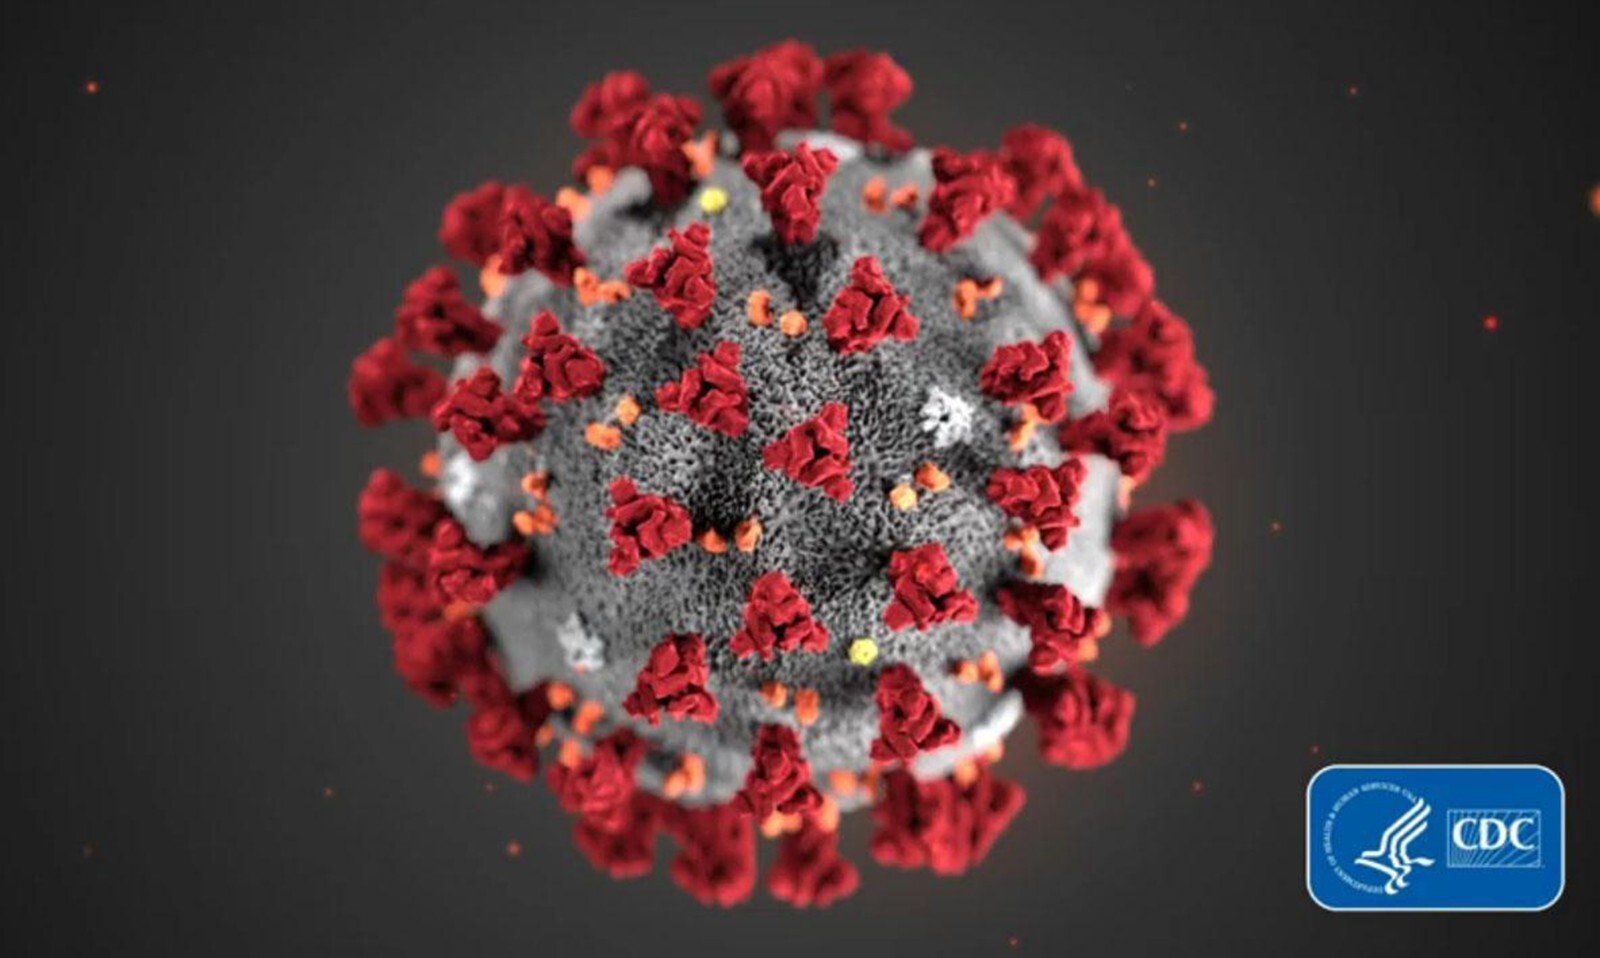 A Covid-19 particle is pictured in this image provided by the Centers for Disease Control and Prevention. Photo: CDC/TNS